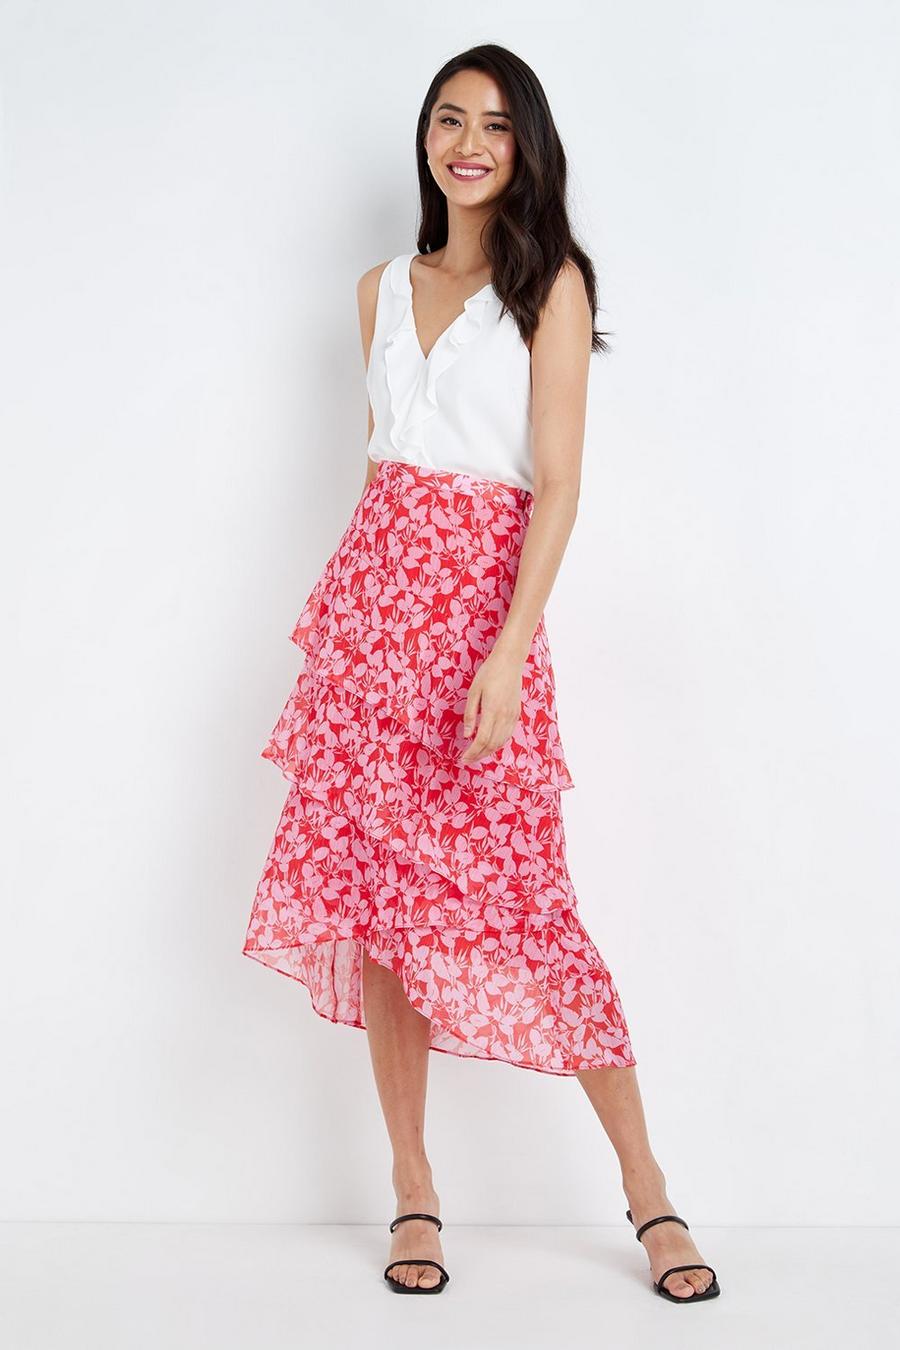 Ditsy Floral Red Pink Chiffon Skirt